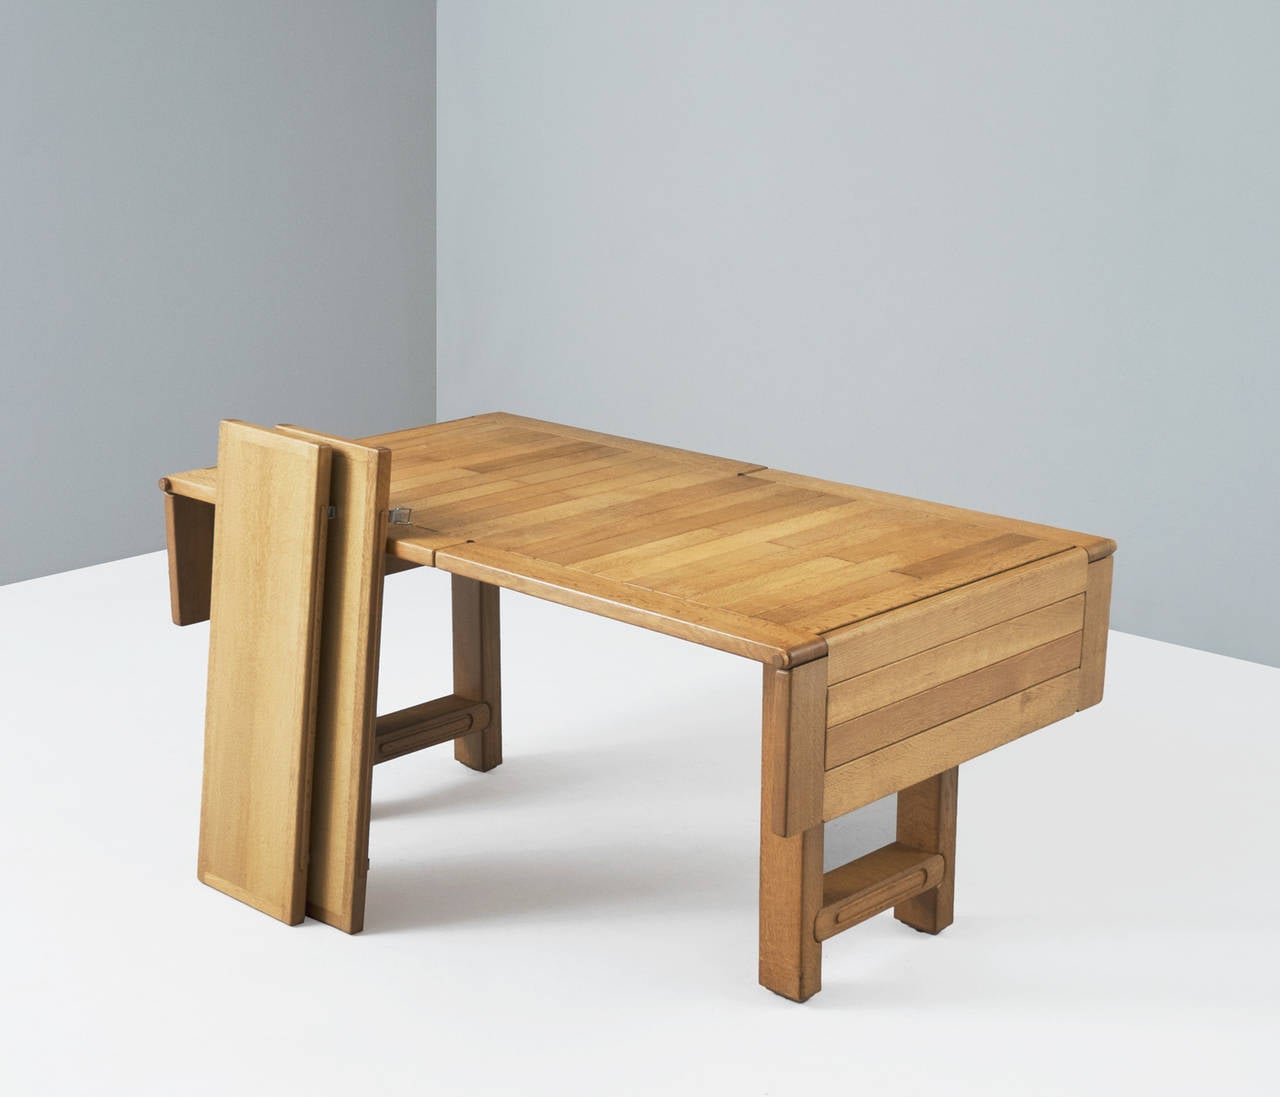 Guillerme & Chambron, dining table model 'Bourbonnais', in oak, France, 1970s.

The solid frame together with the extendible leaves are in a very good working condition. The leaves are 'hidden' under the top and this table could easily be